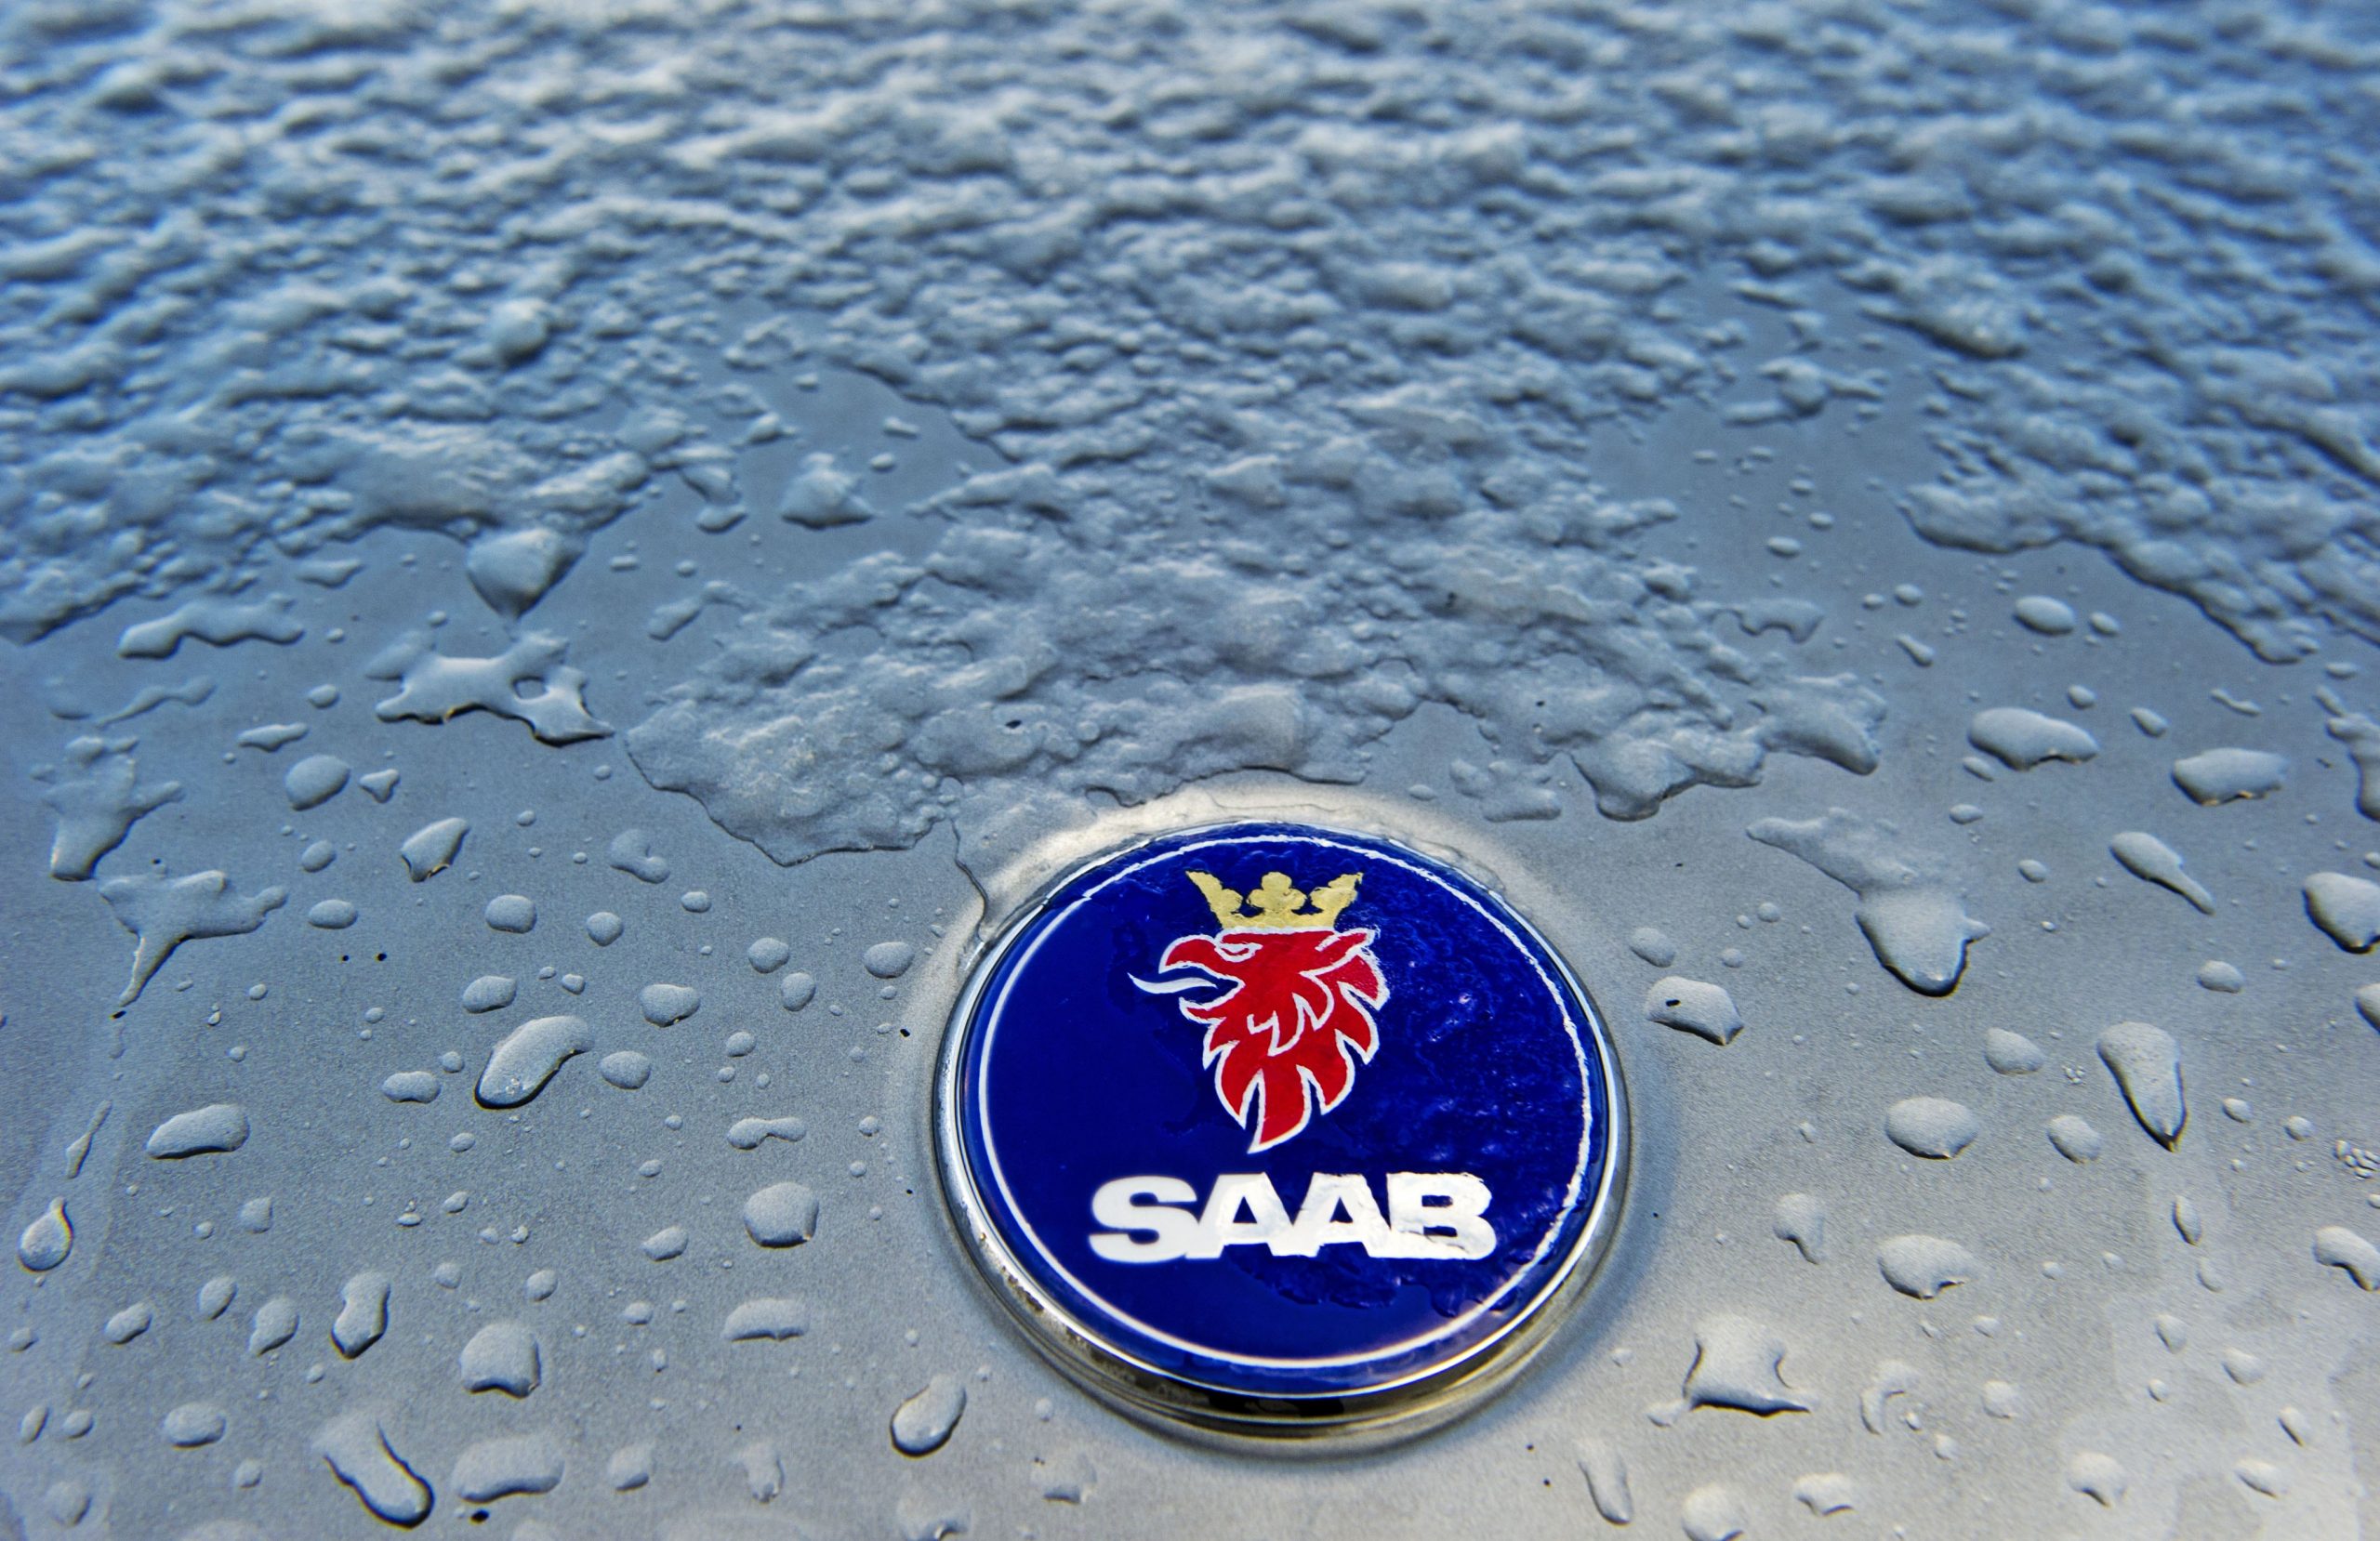 A Saab logo seen on the front of a car